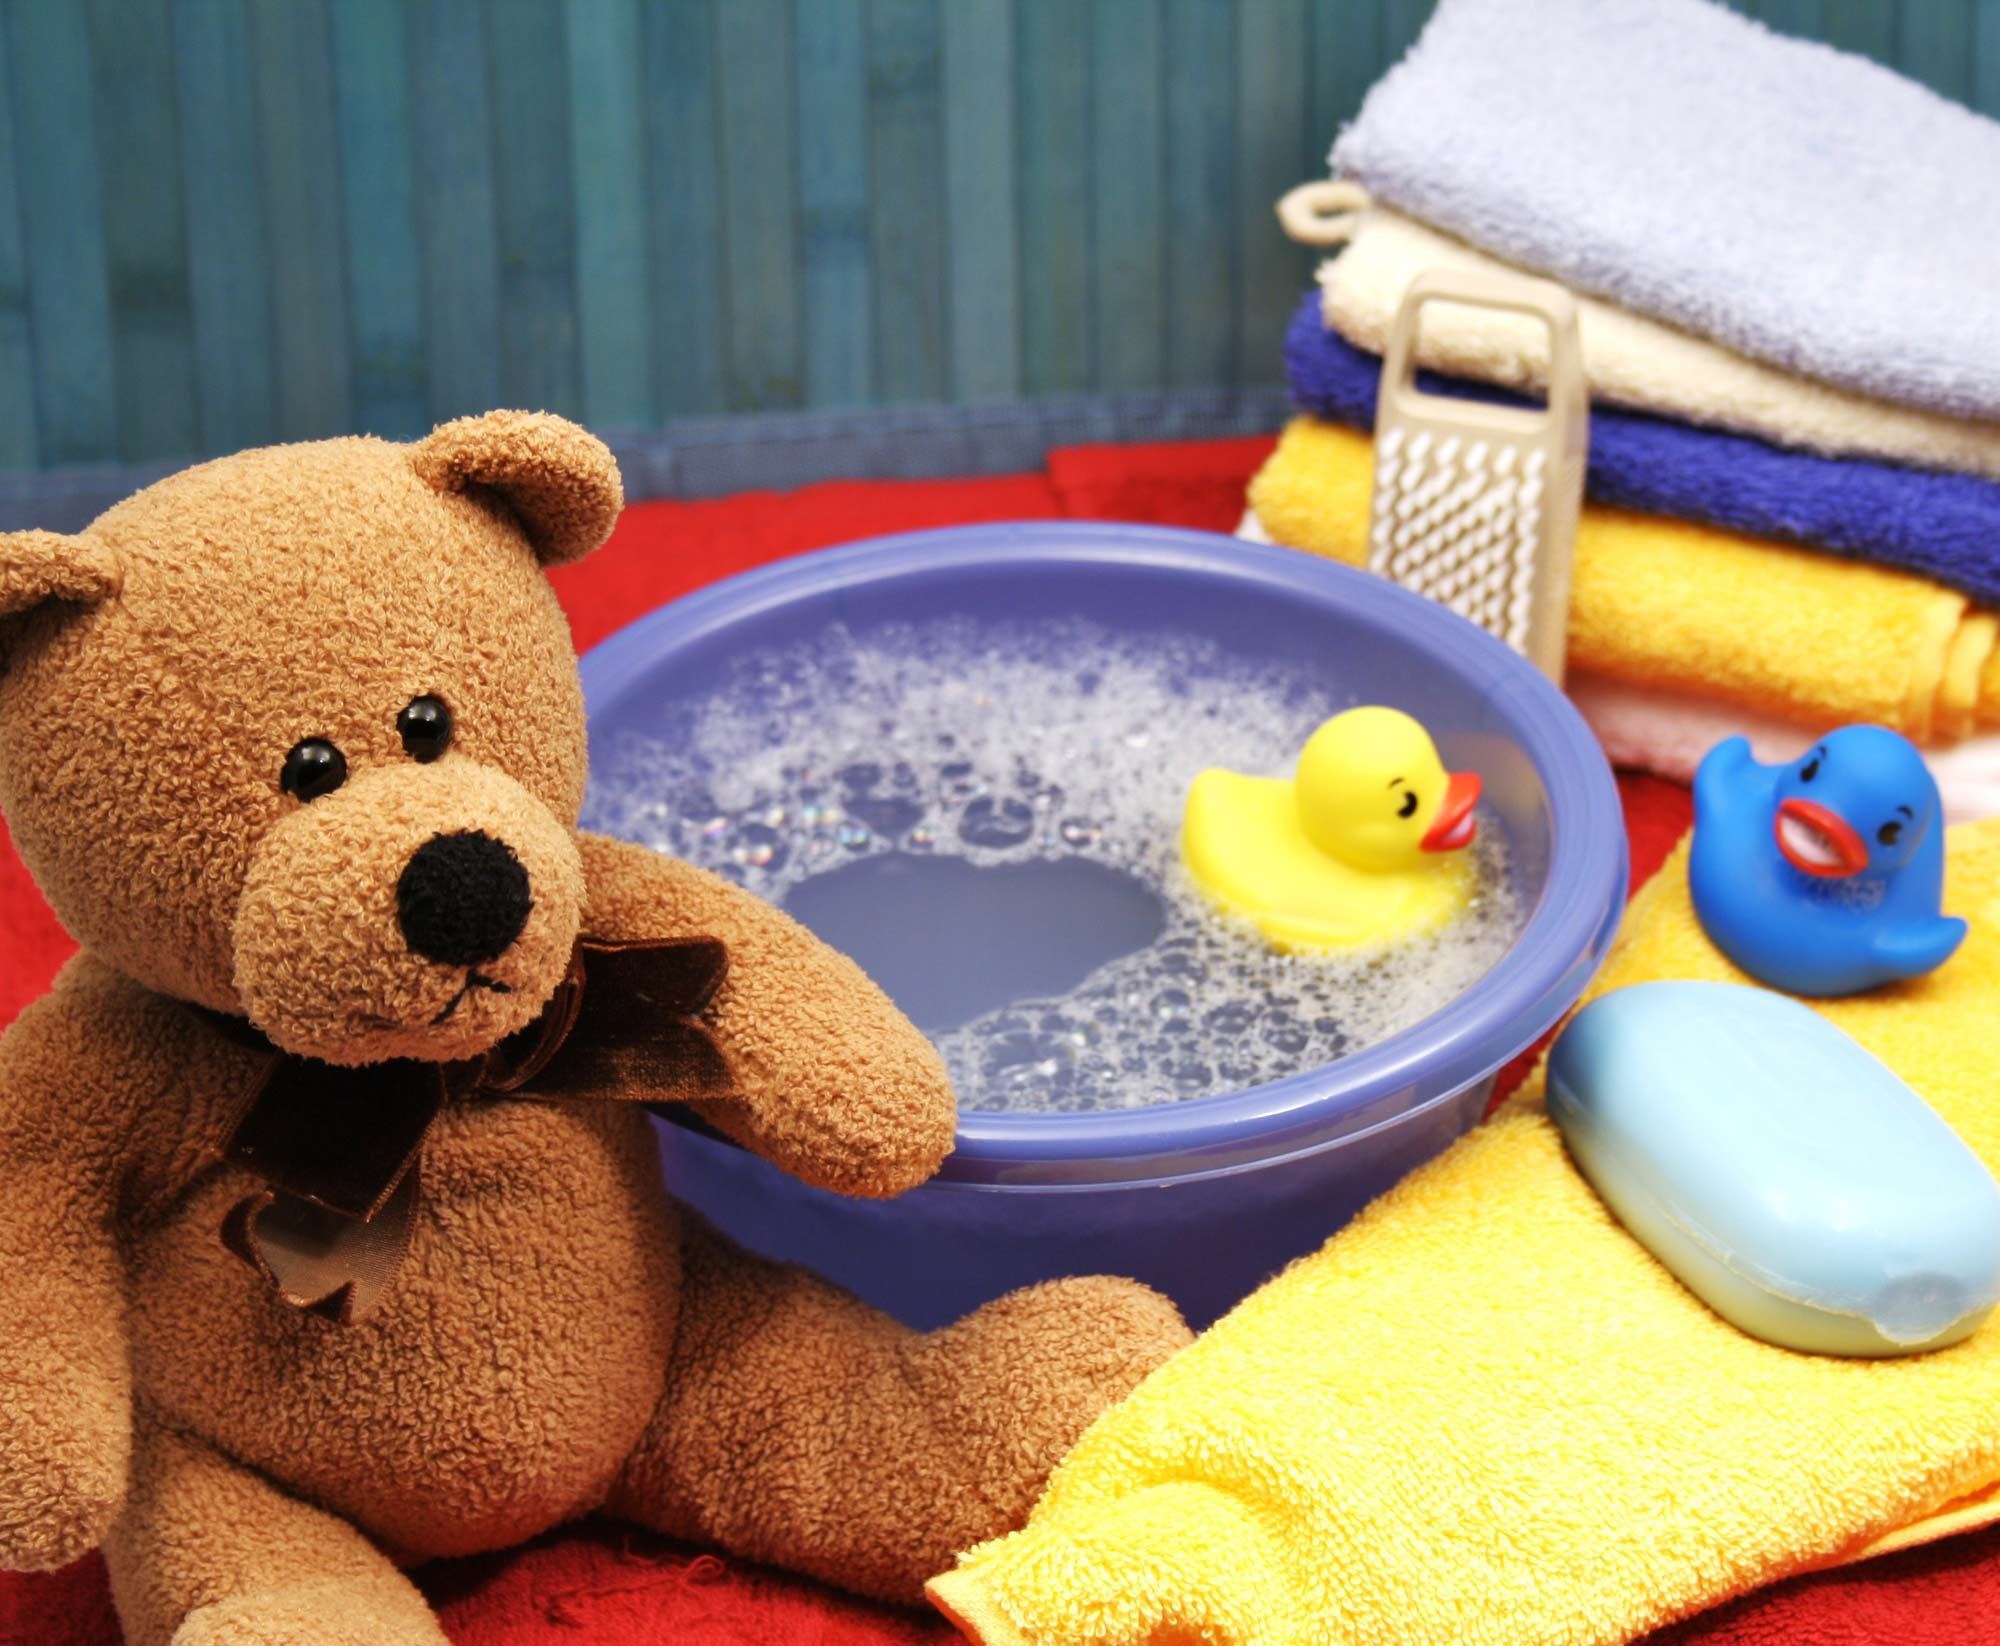 Bath Toys for Babies: What to Look For